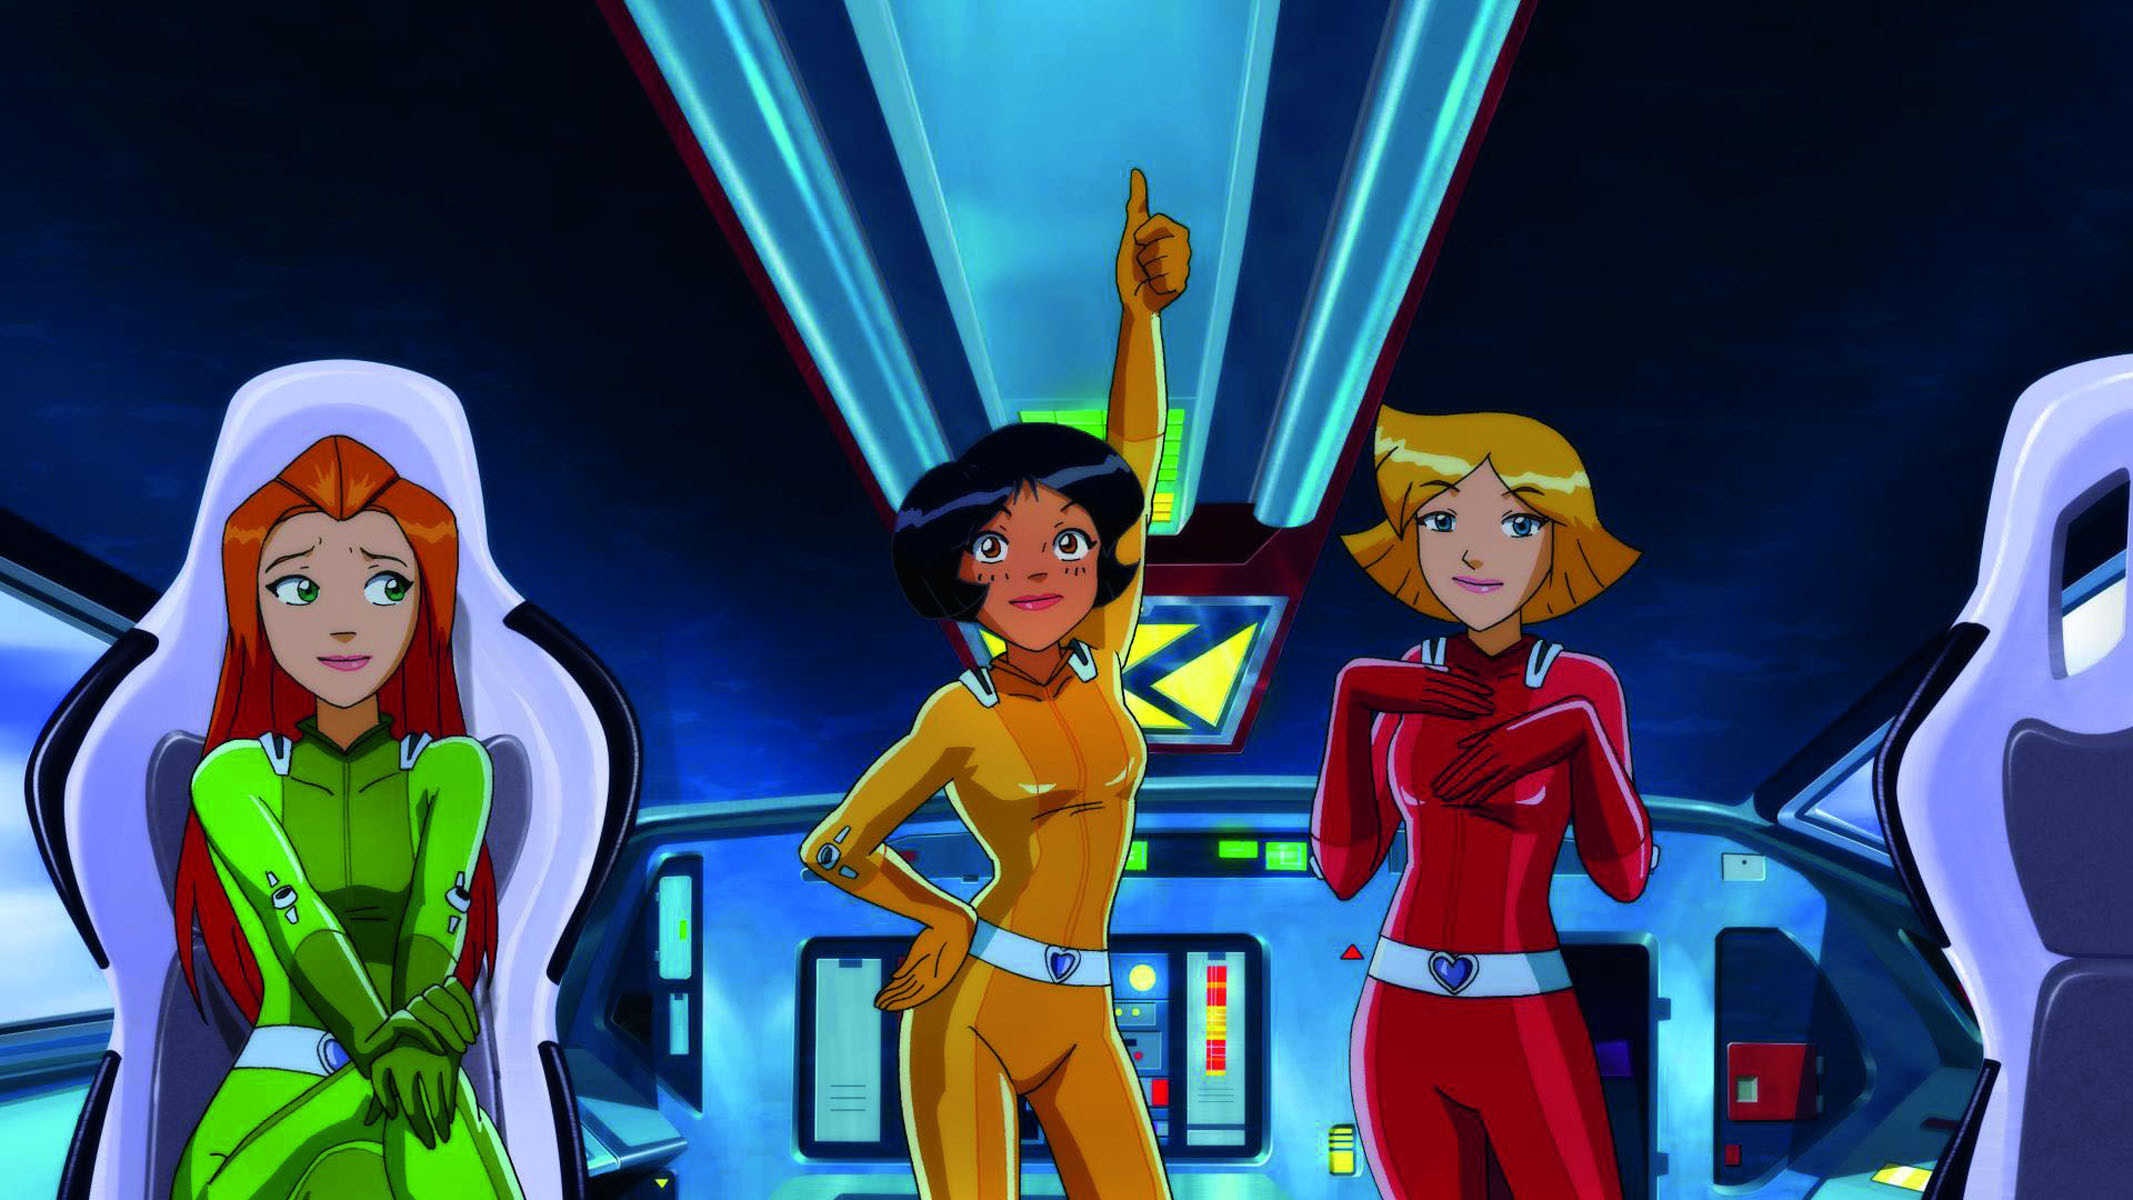 TOTALLY SPIES! LE FILM, from left: Sam, Alex, Clover, 2009